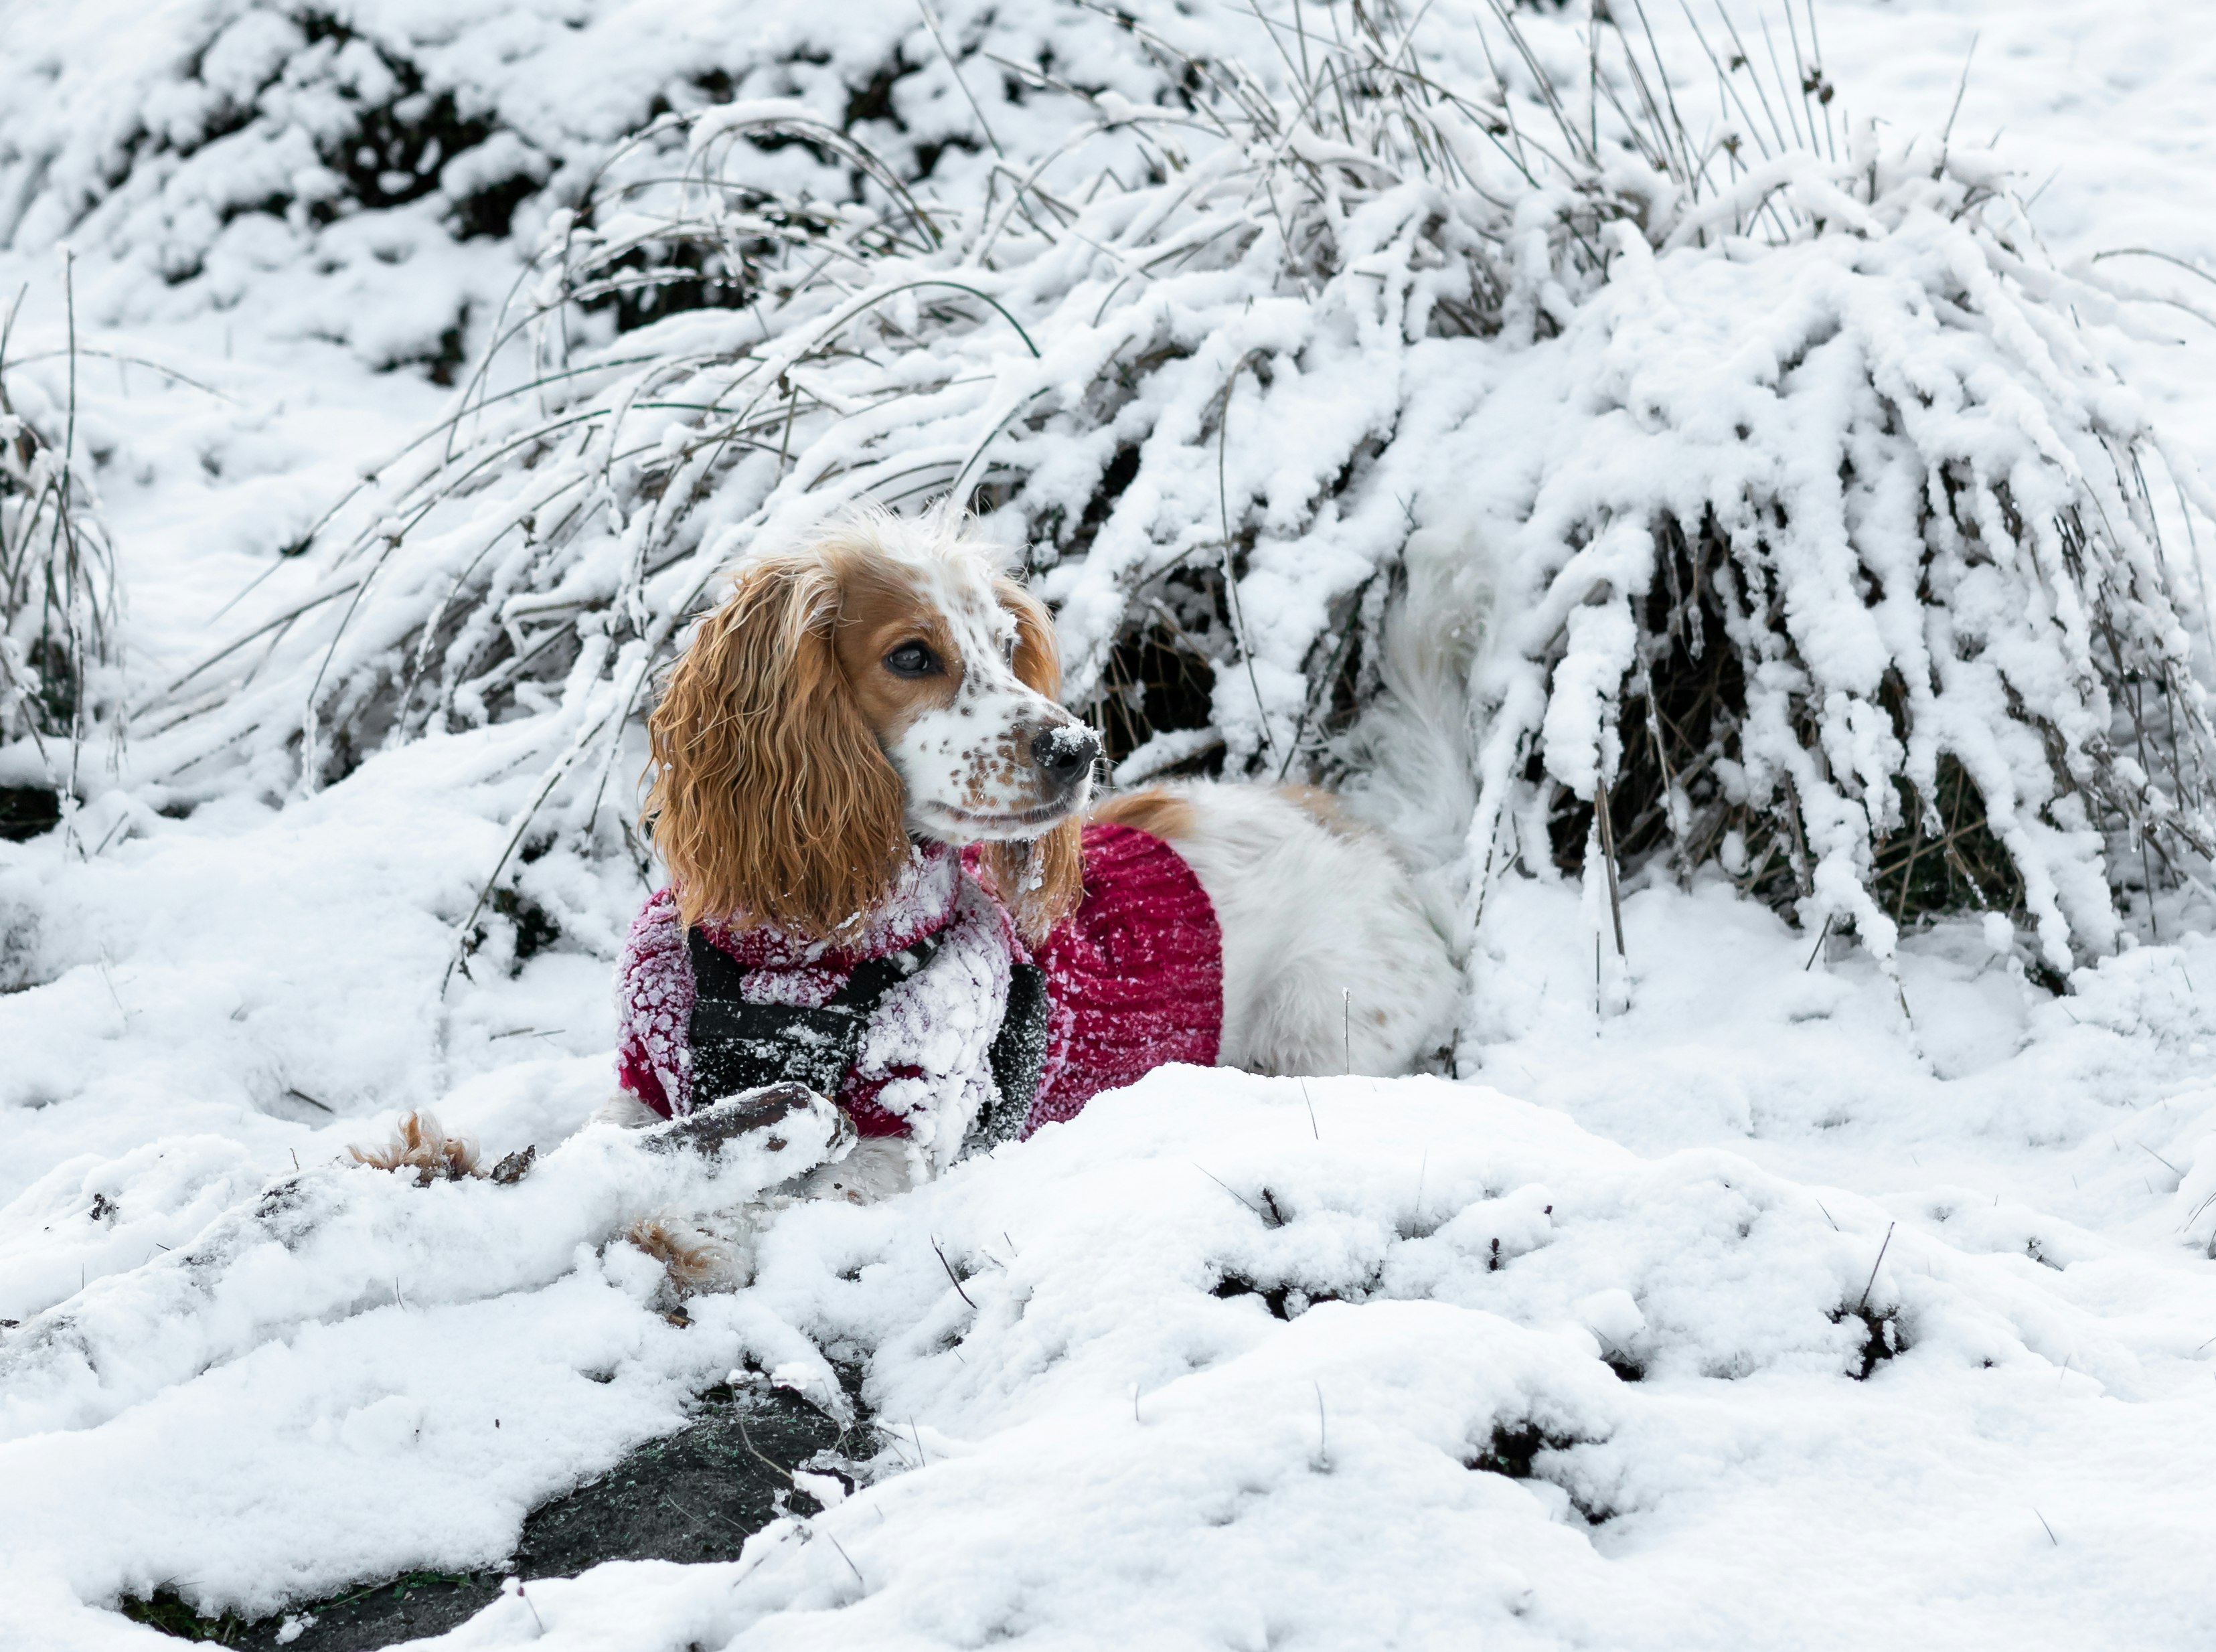 Adventures with Willow my English Cocker Spaniel (working strain). Willow enjoying her first ever snows and wearing her new red jumper (cardigan). She was having some great fun! Photo by Michael Cummins Photography - www.michaelcummins.co.uk 